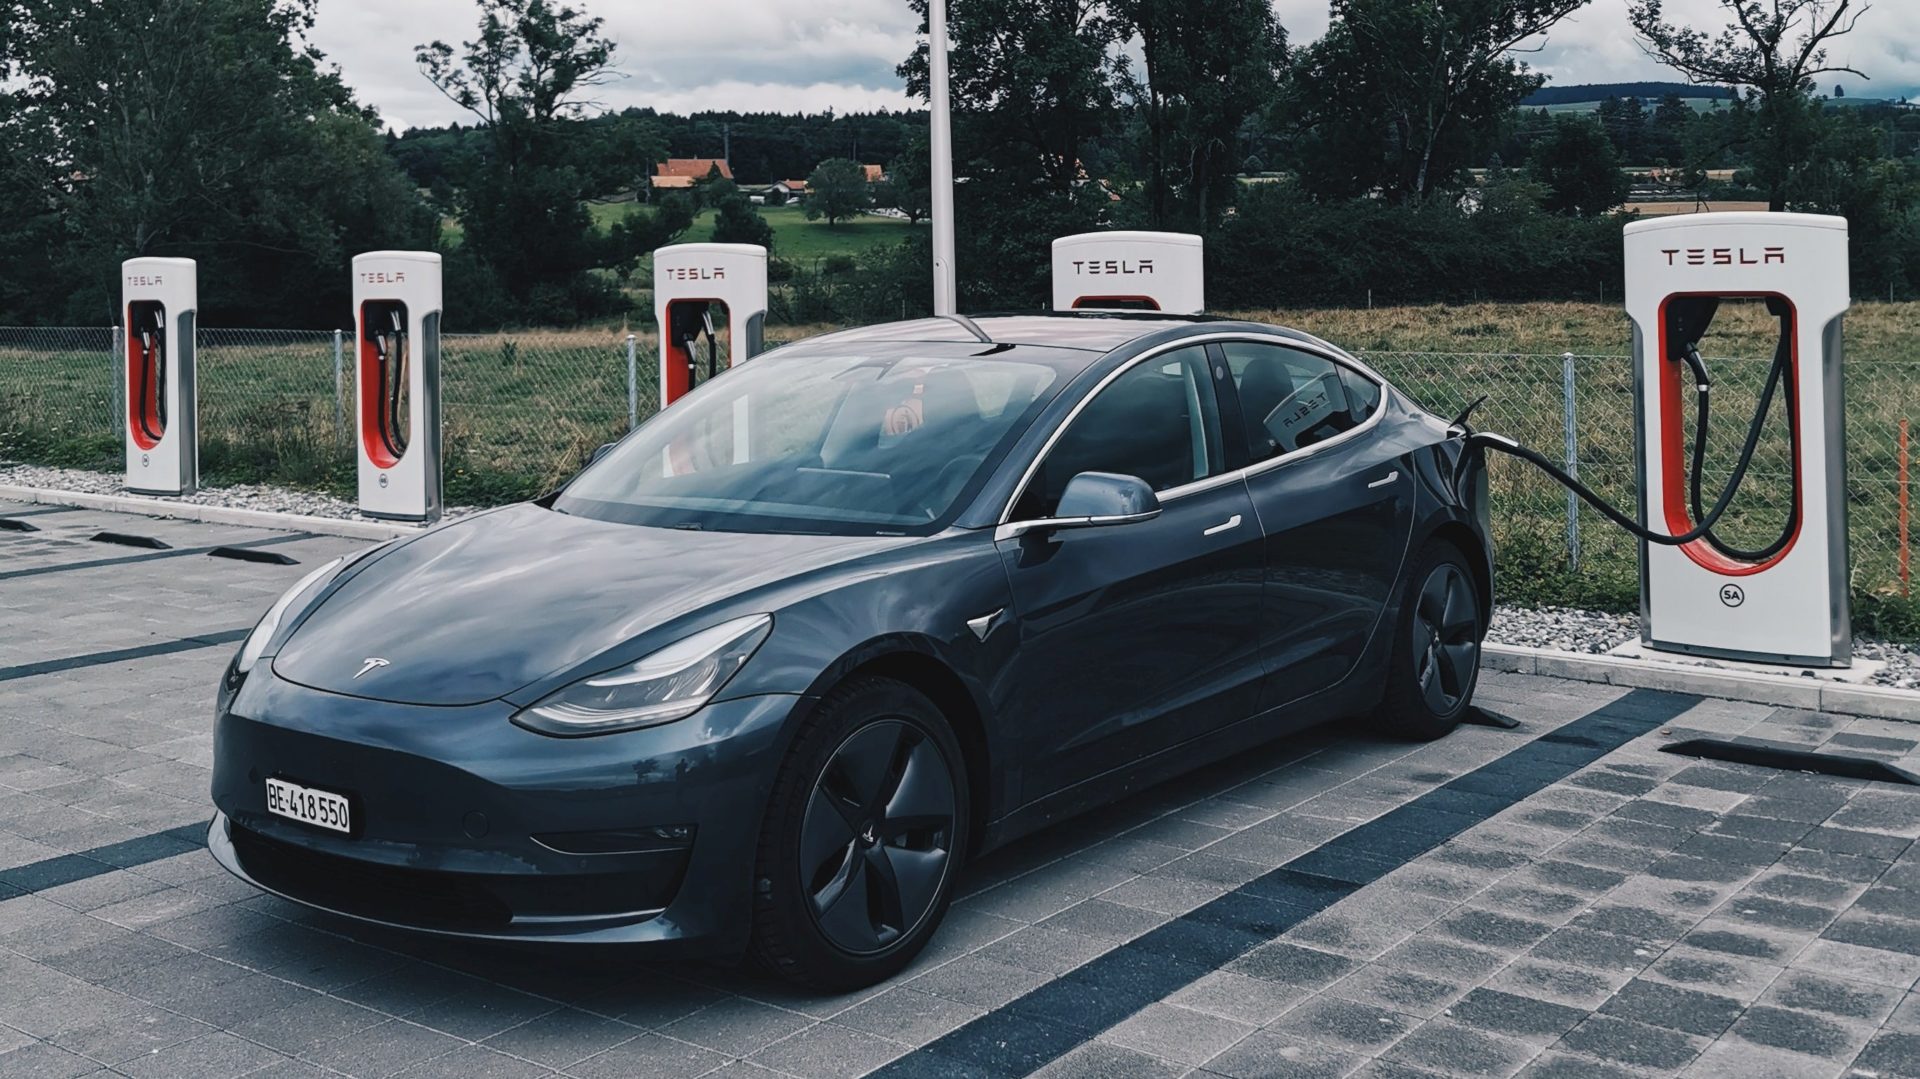 Tesla charging at a Supercharger station (Photo by Dario on Unsplash)